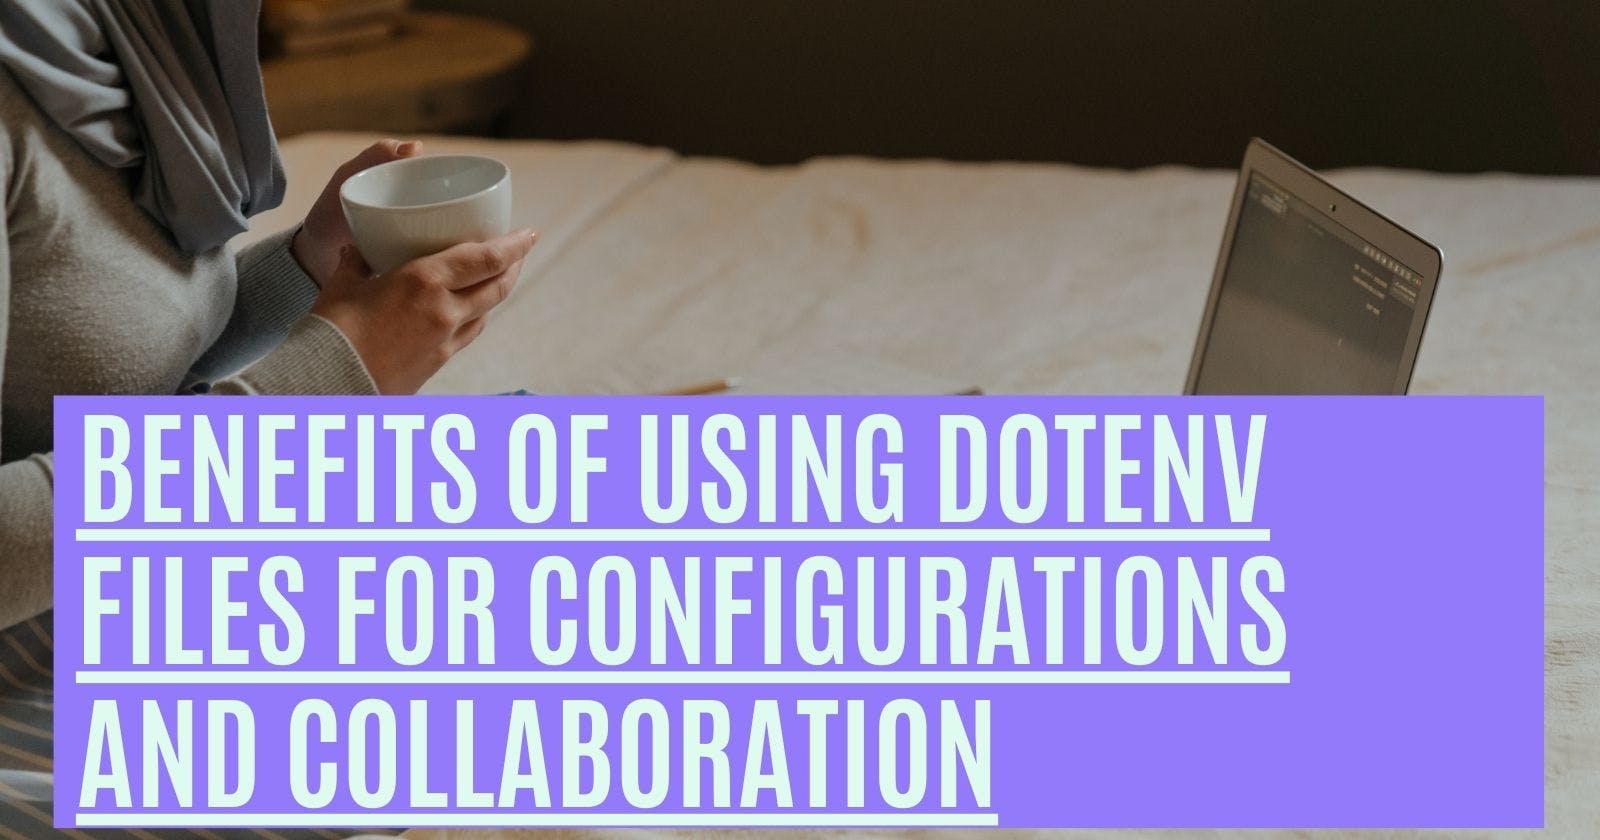 Benefits of Using dotenv Files for Configurations and Collaboration